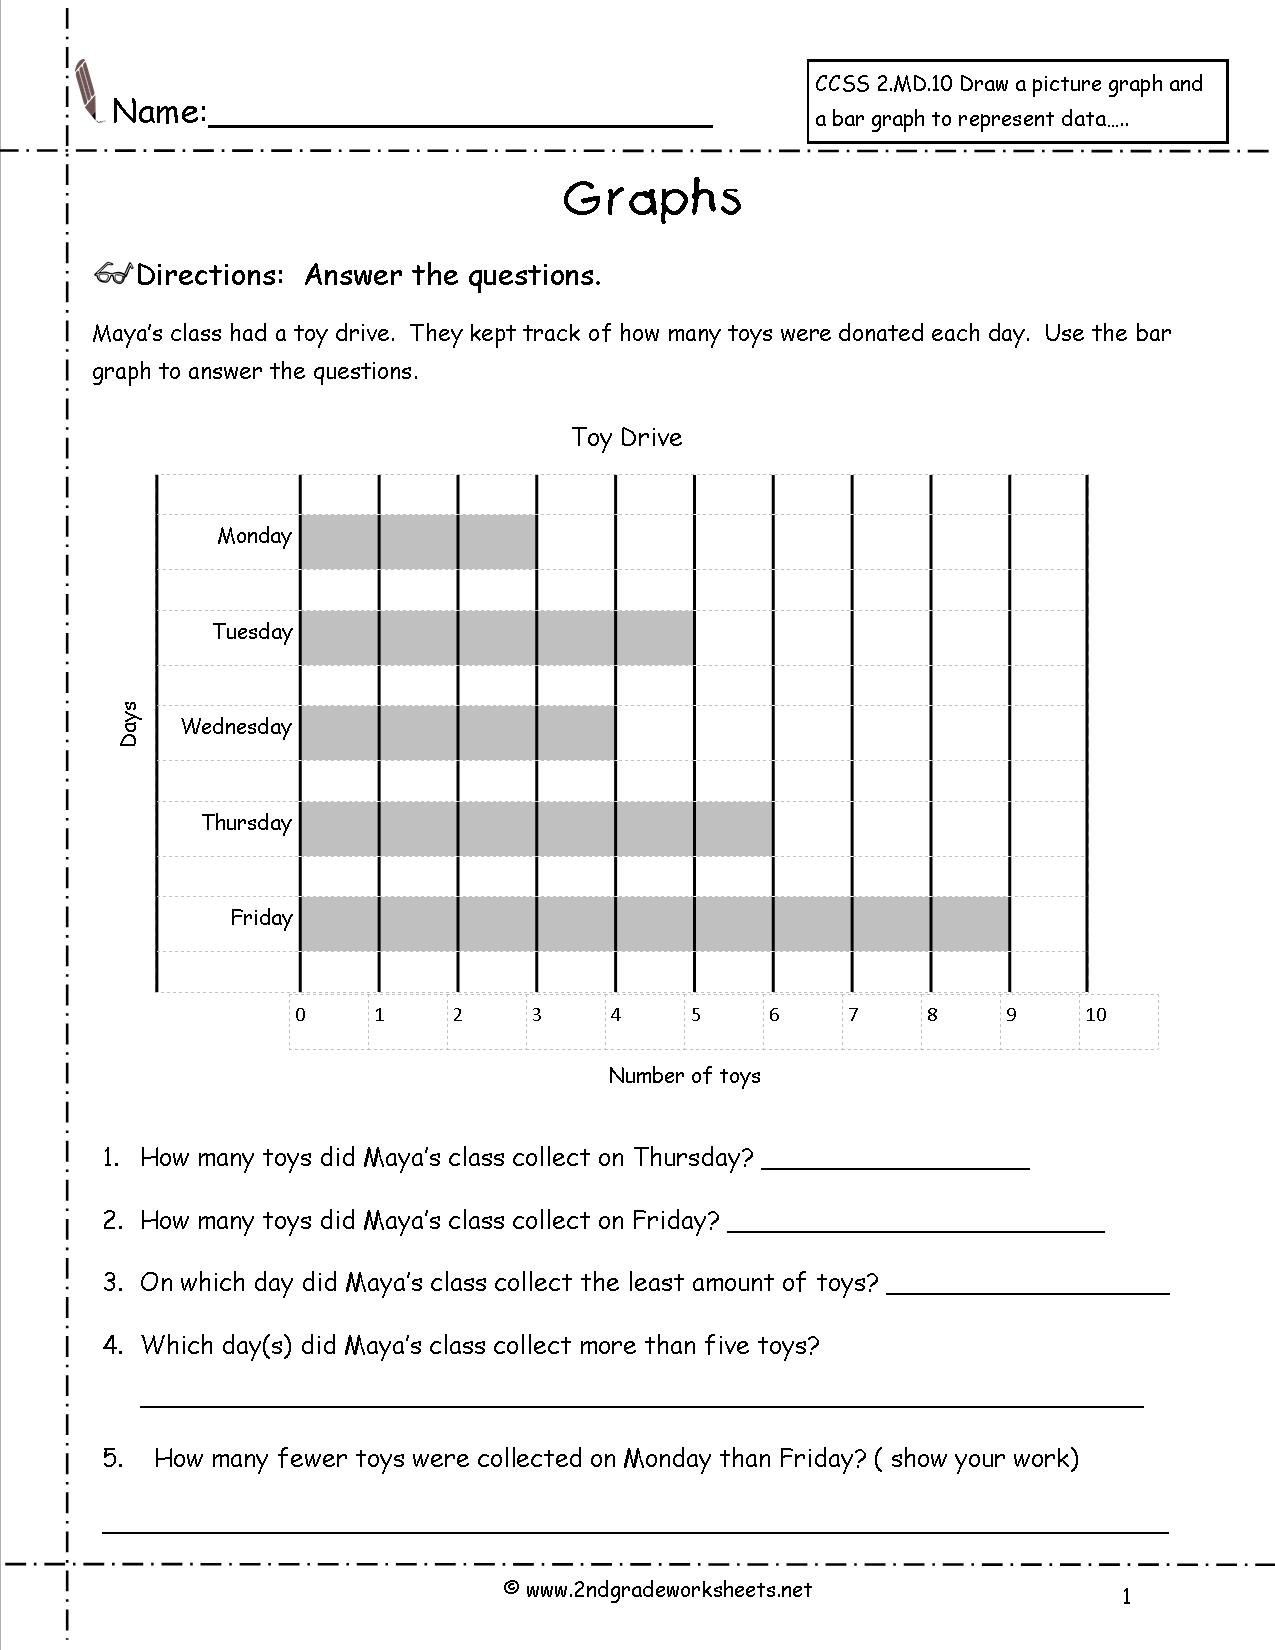 Reading And Creating Bar Graphs Worksheets From The Teacher's Guide And Science Graphs And Charts Worksheets